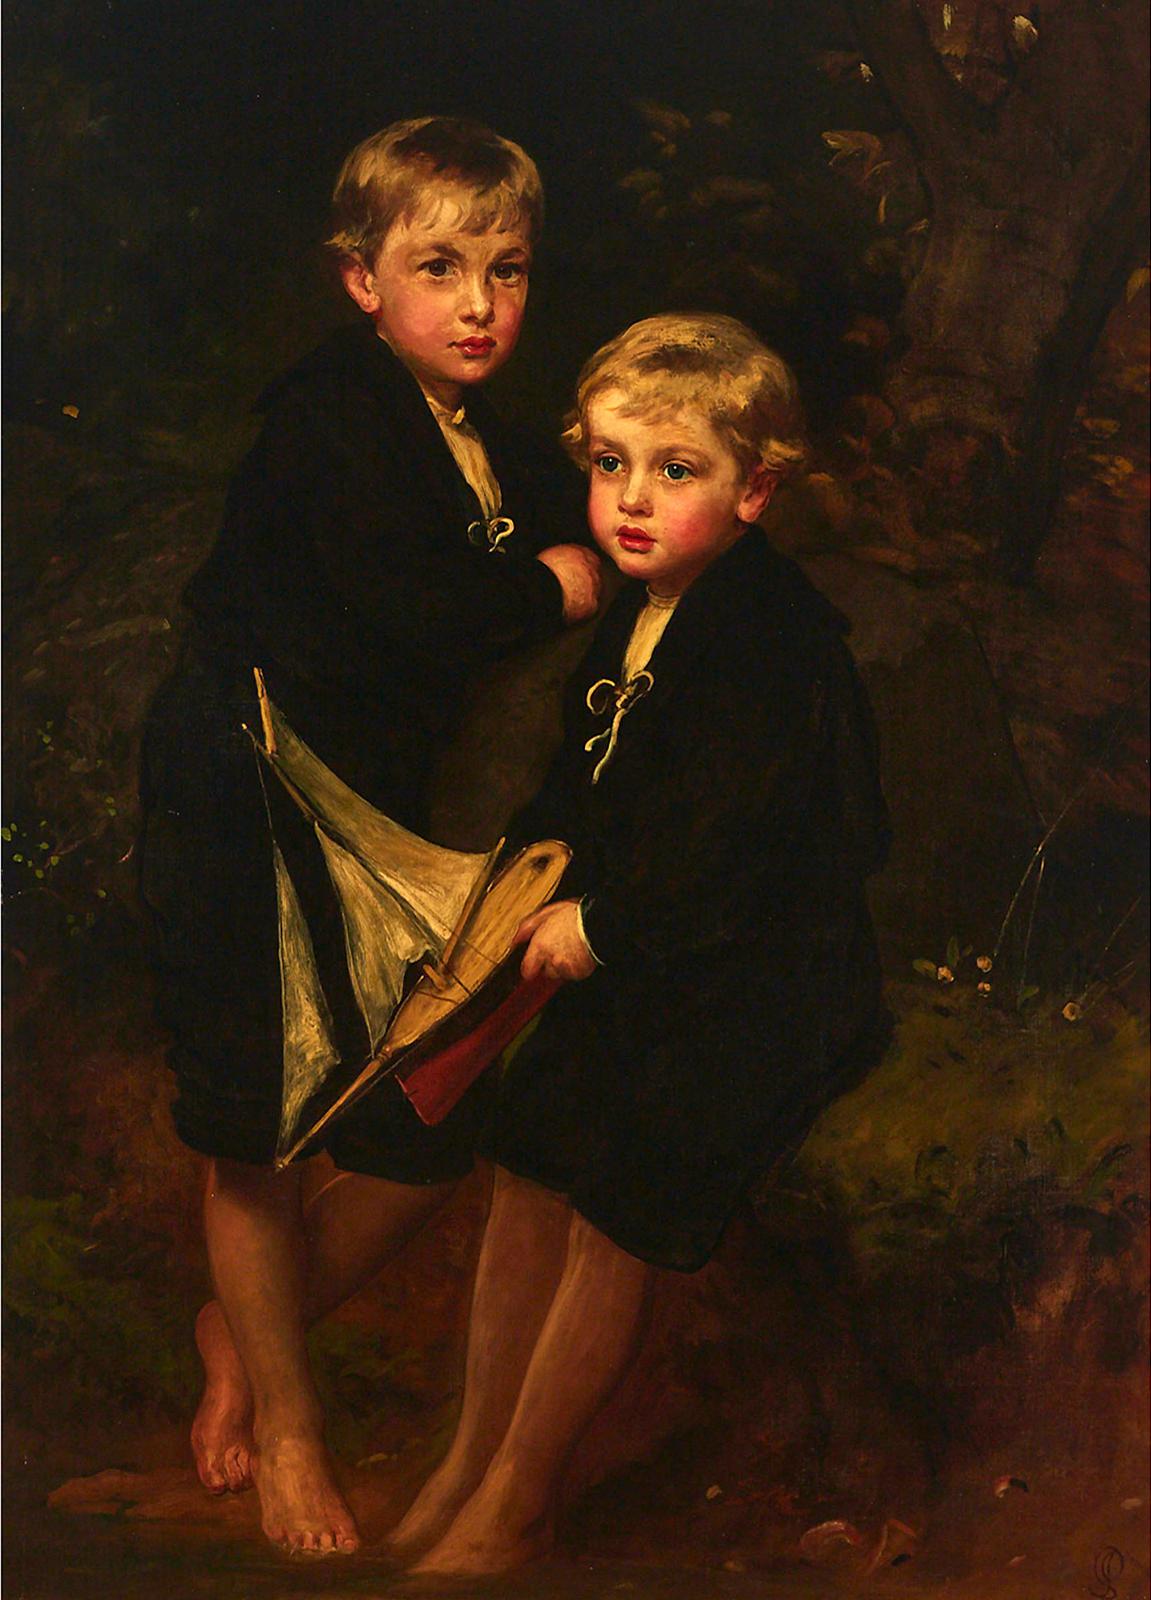 James Sant (1820-1916) - Two Children In A Wooded Landscape